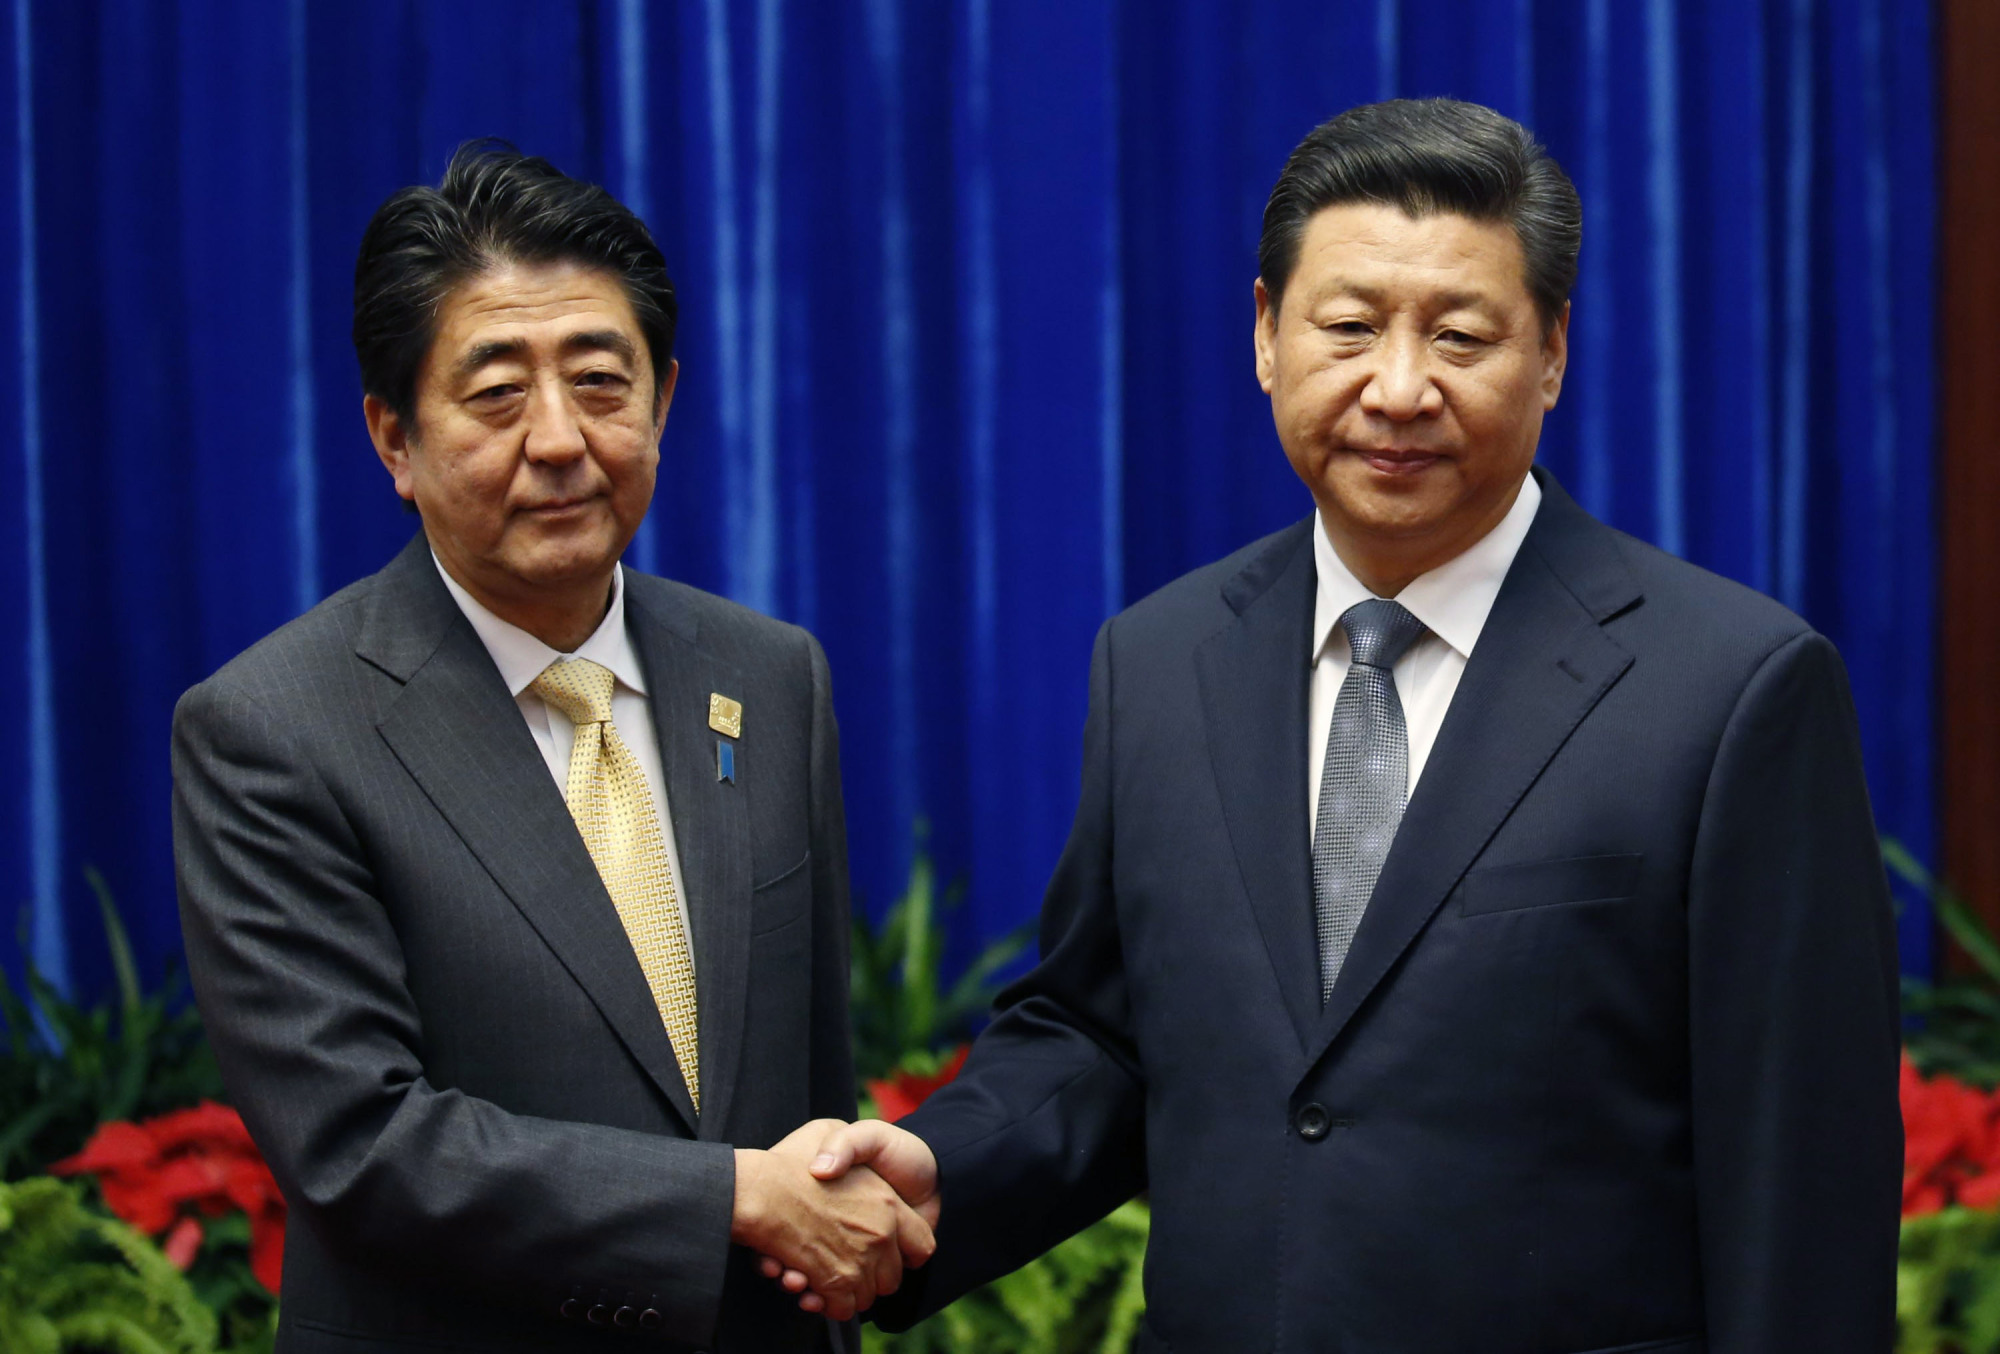 Prime Minister Shinzo Abe and Chinese leader Xi Jinping shake hands during their meeting at the Great Hall of the People, on the sidelines of the Asia-Pacific Economic Cooperation summit, in Beijing on Nov. 10, 2014. The uneasy handshake marked the first meeting between the two men since either took power, and an awkward first gesture toward easing two years of high tensions. | AP